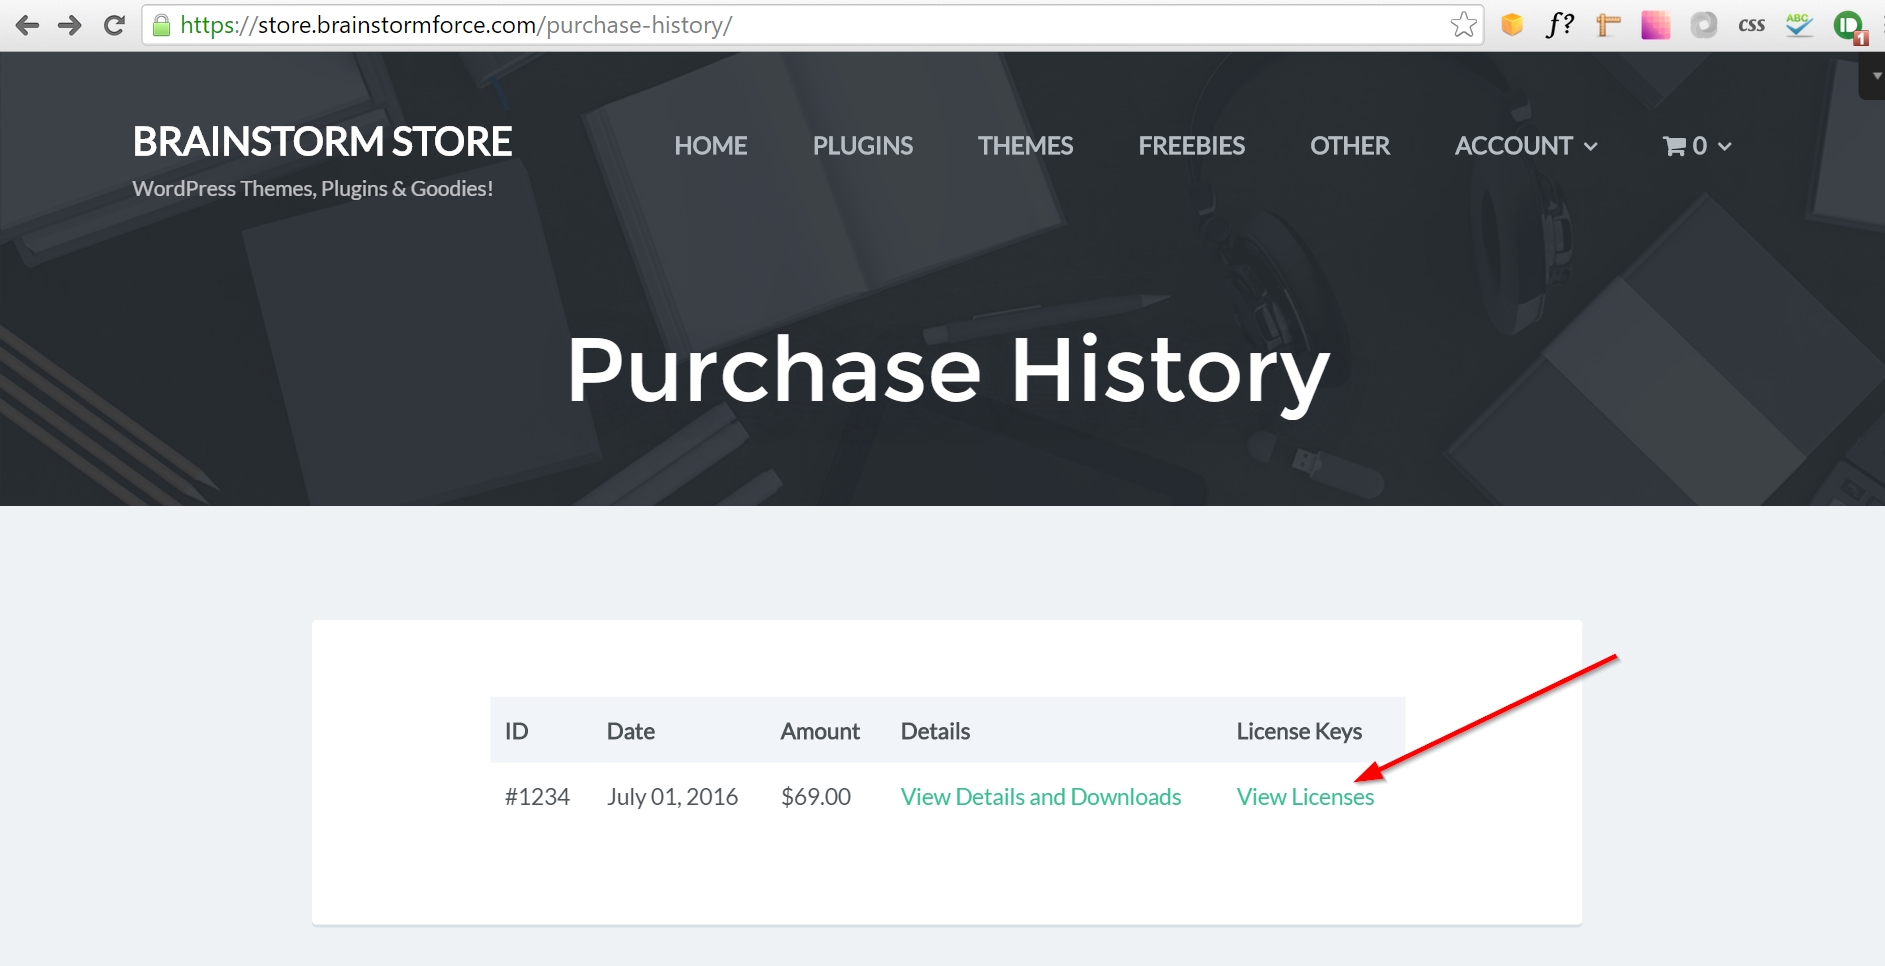 View Licenses in Purchase history